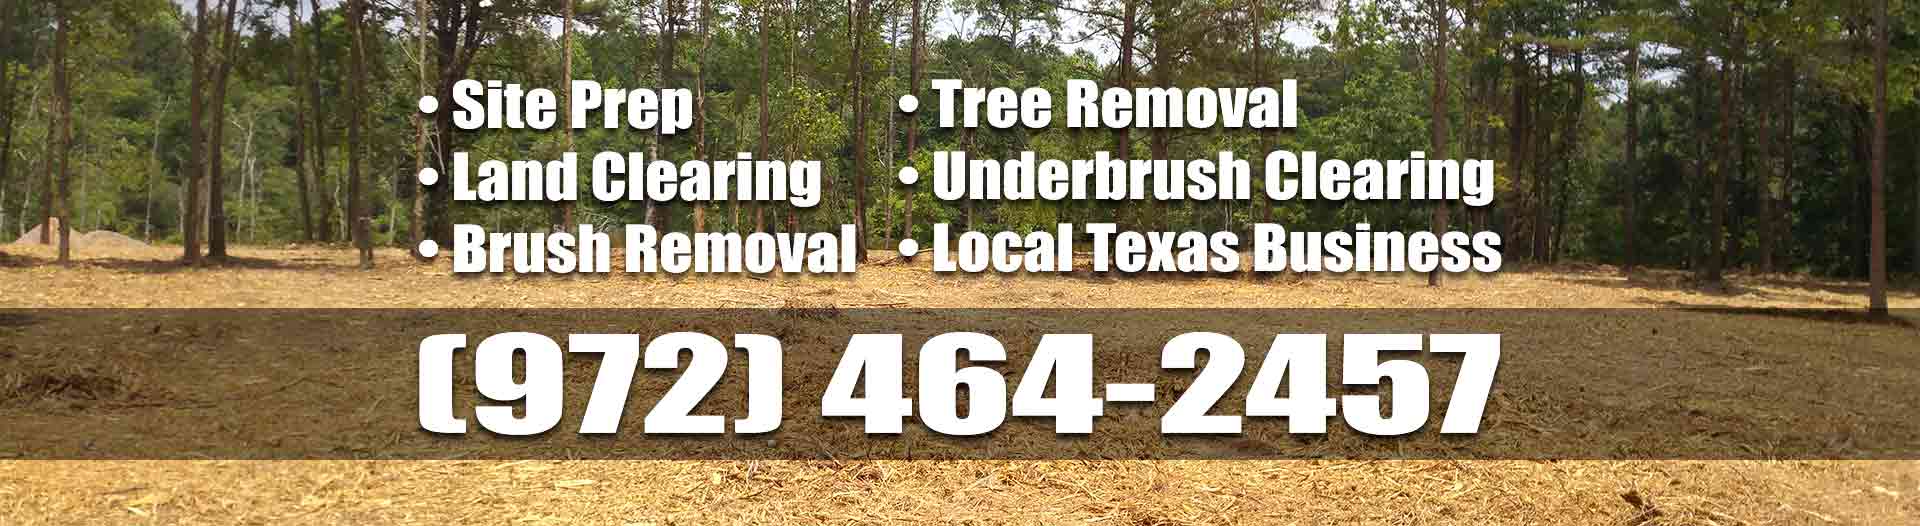 Texas Land Clearing, Brush Removal, Underbrush Clearing, And Site Prep